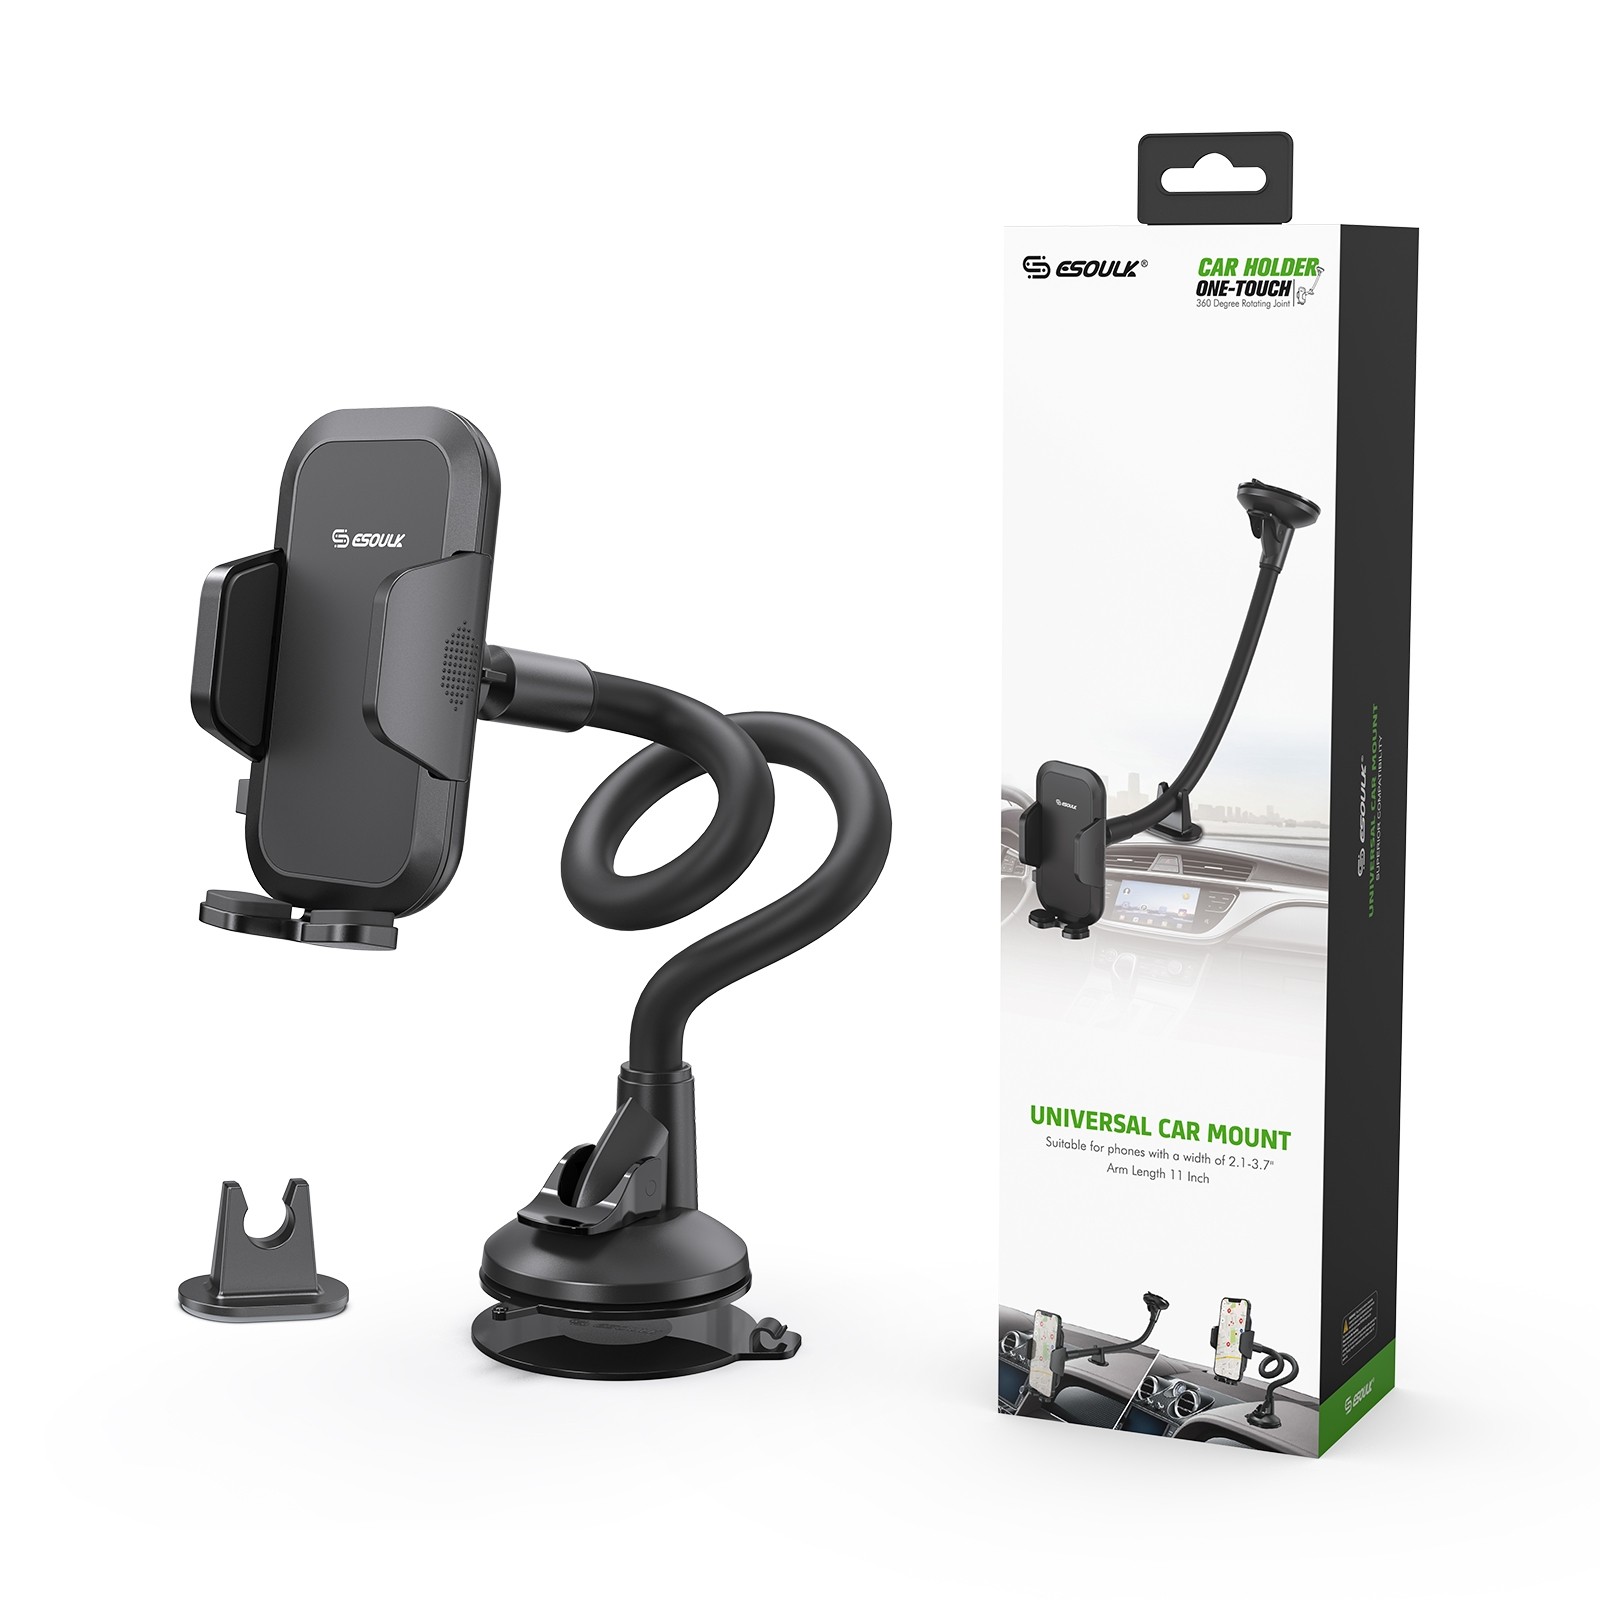 Universal Car Mount One-Touch EH43BK